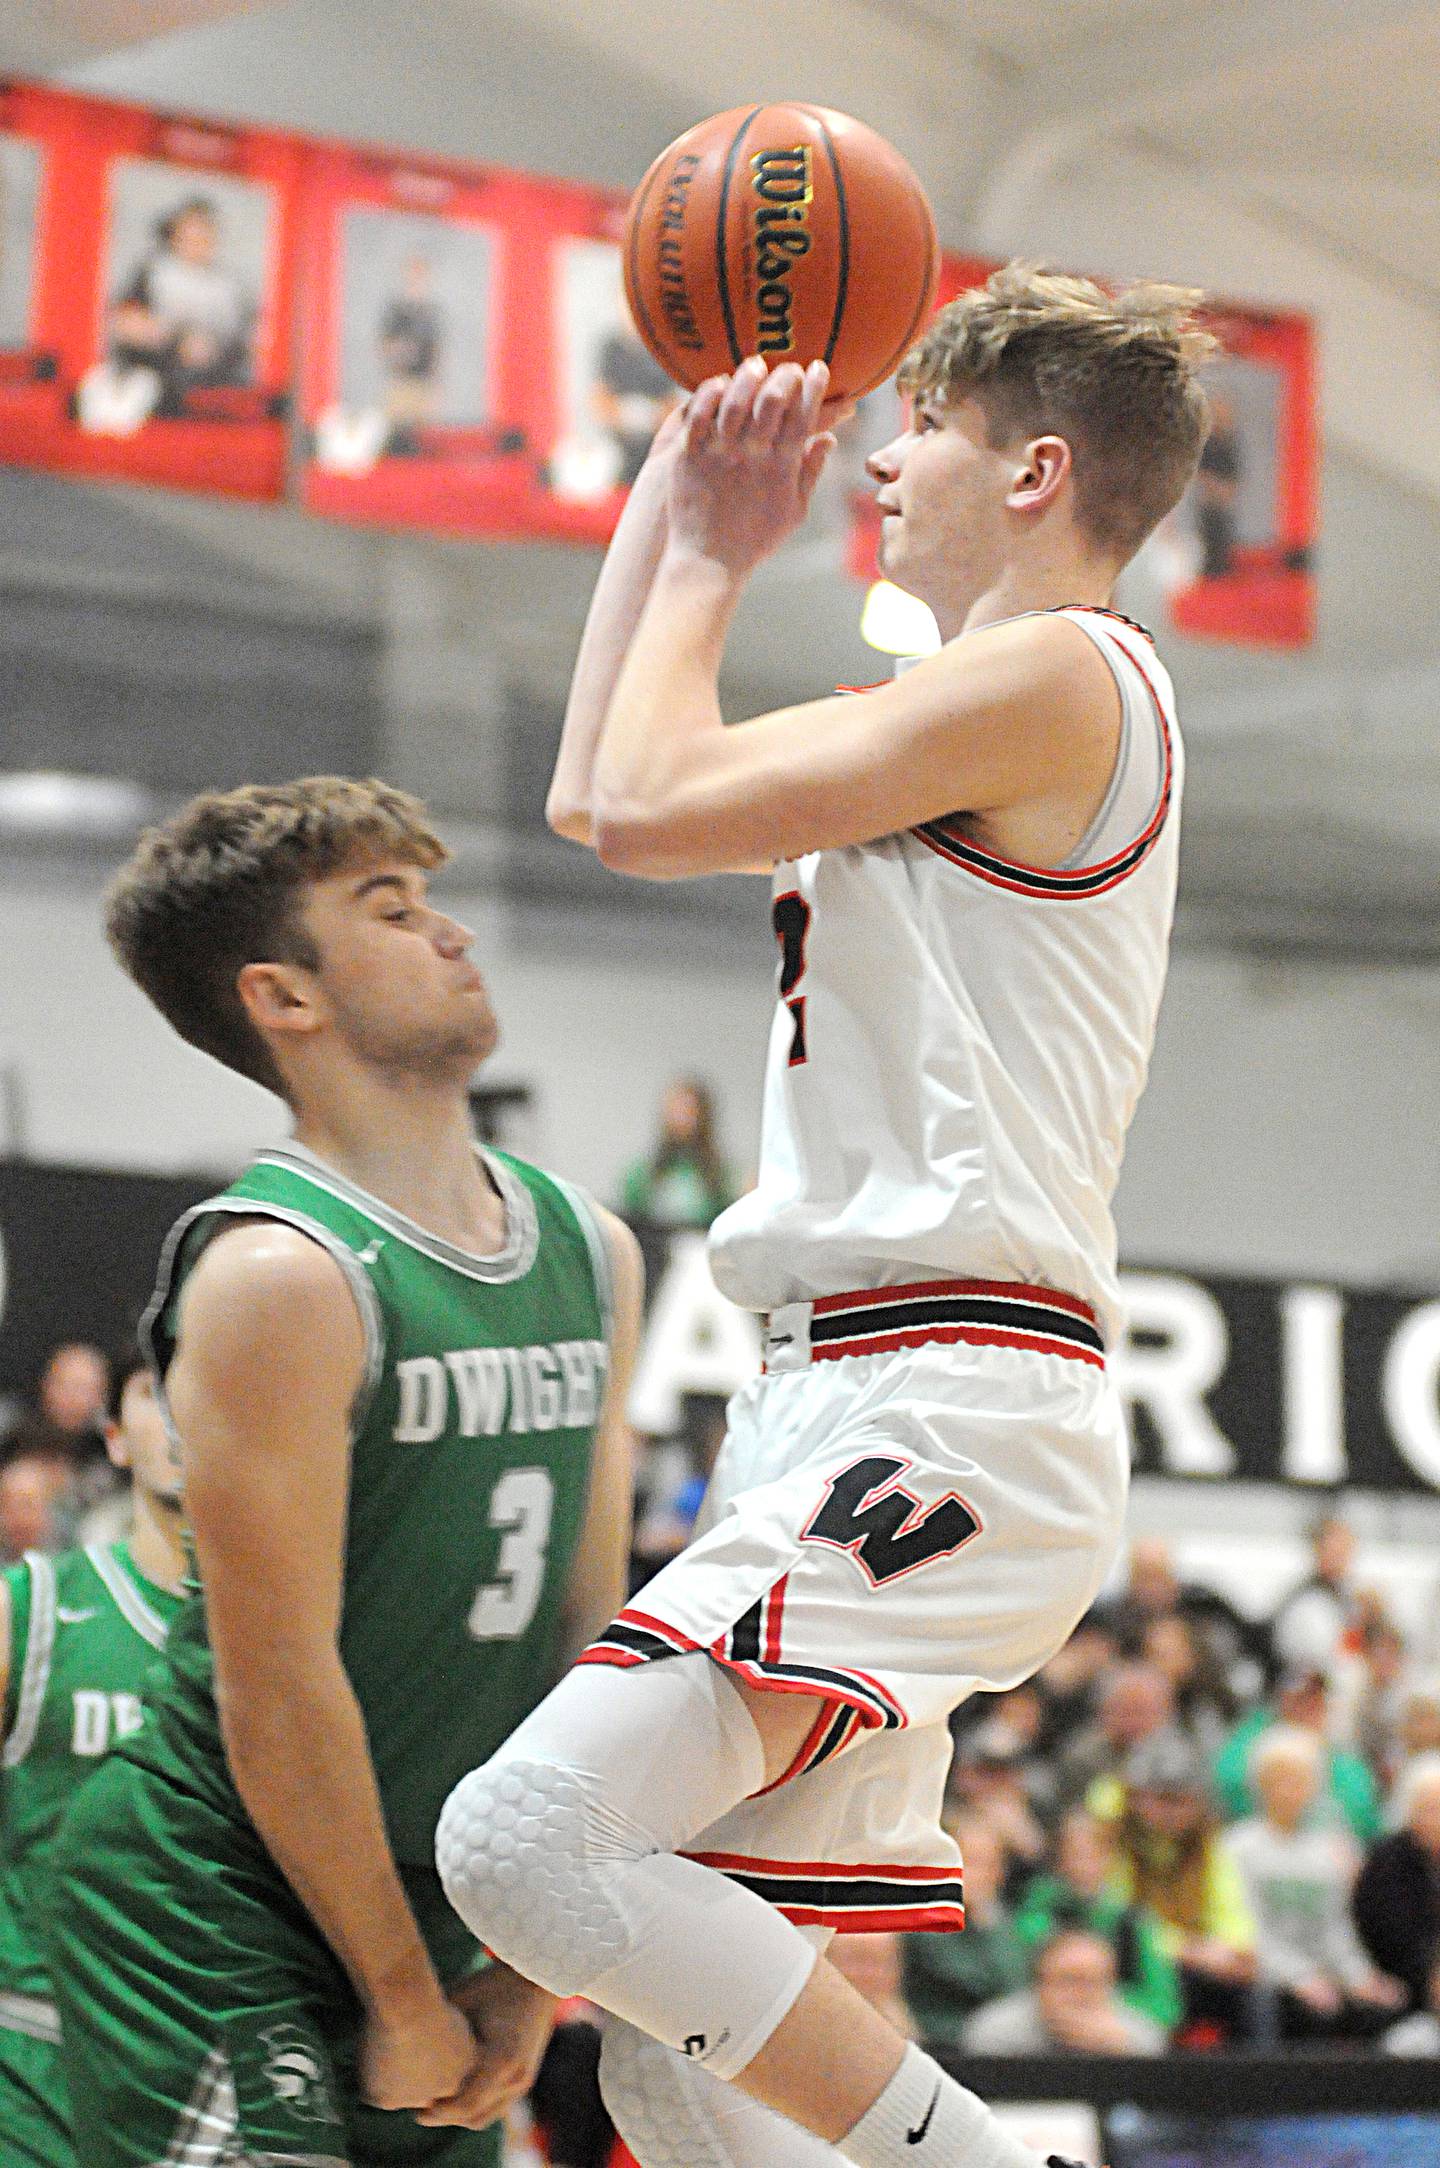 Woodland's Jon Moore shoots past the defense of Dwight's Conner Telford at the Warrior Dome on Friday, Jan. 13, 2023.